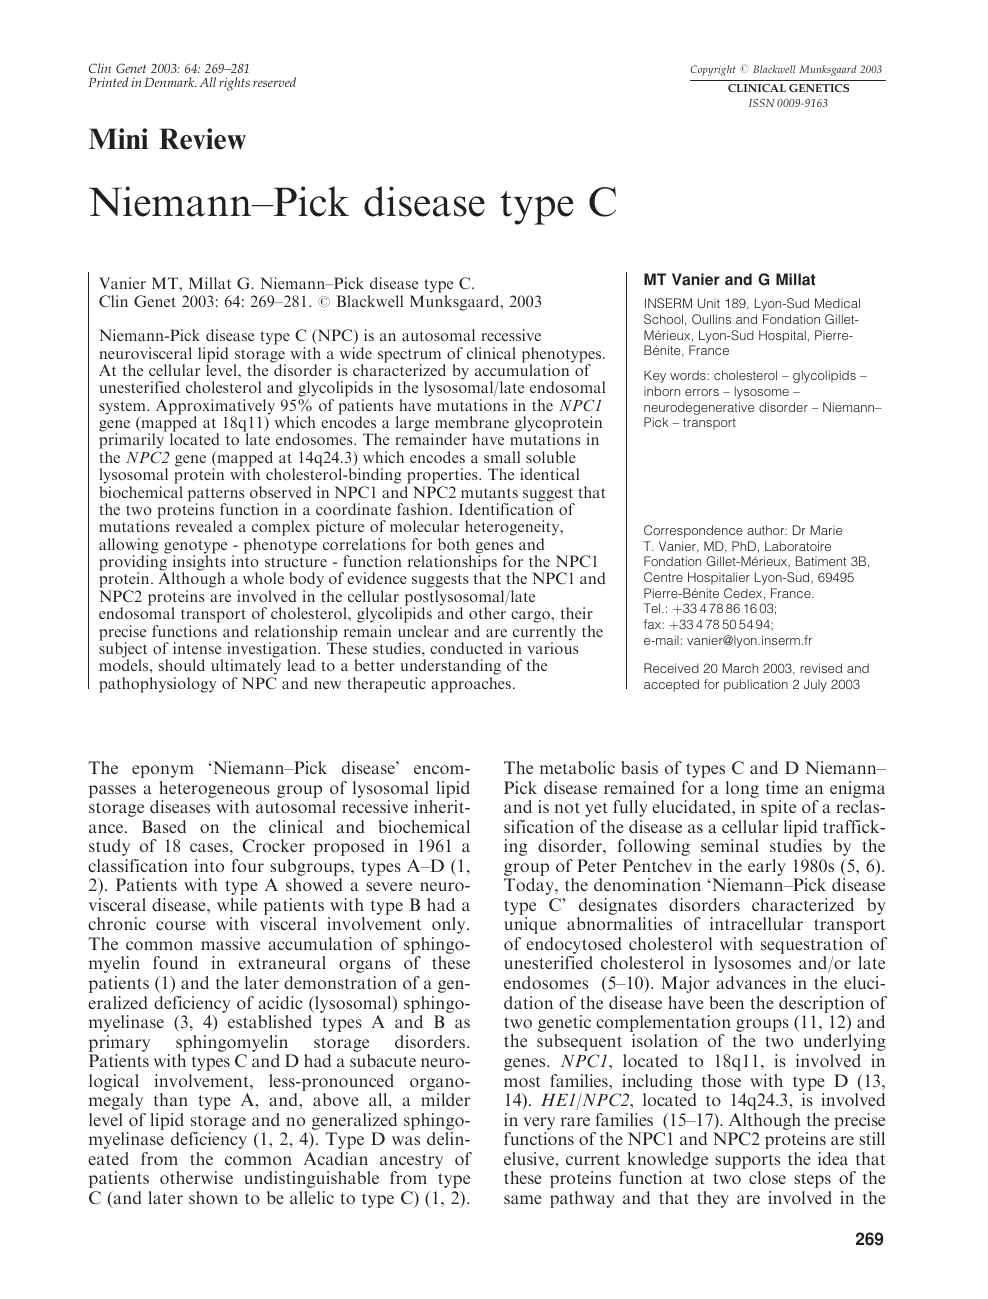 Critical role for glycosphingolipids in Niemann-Pick disease type